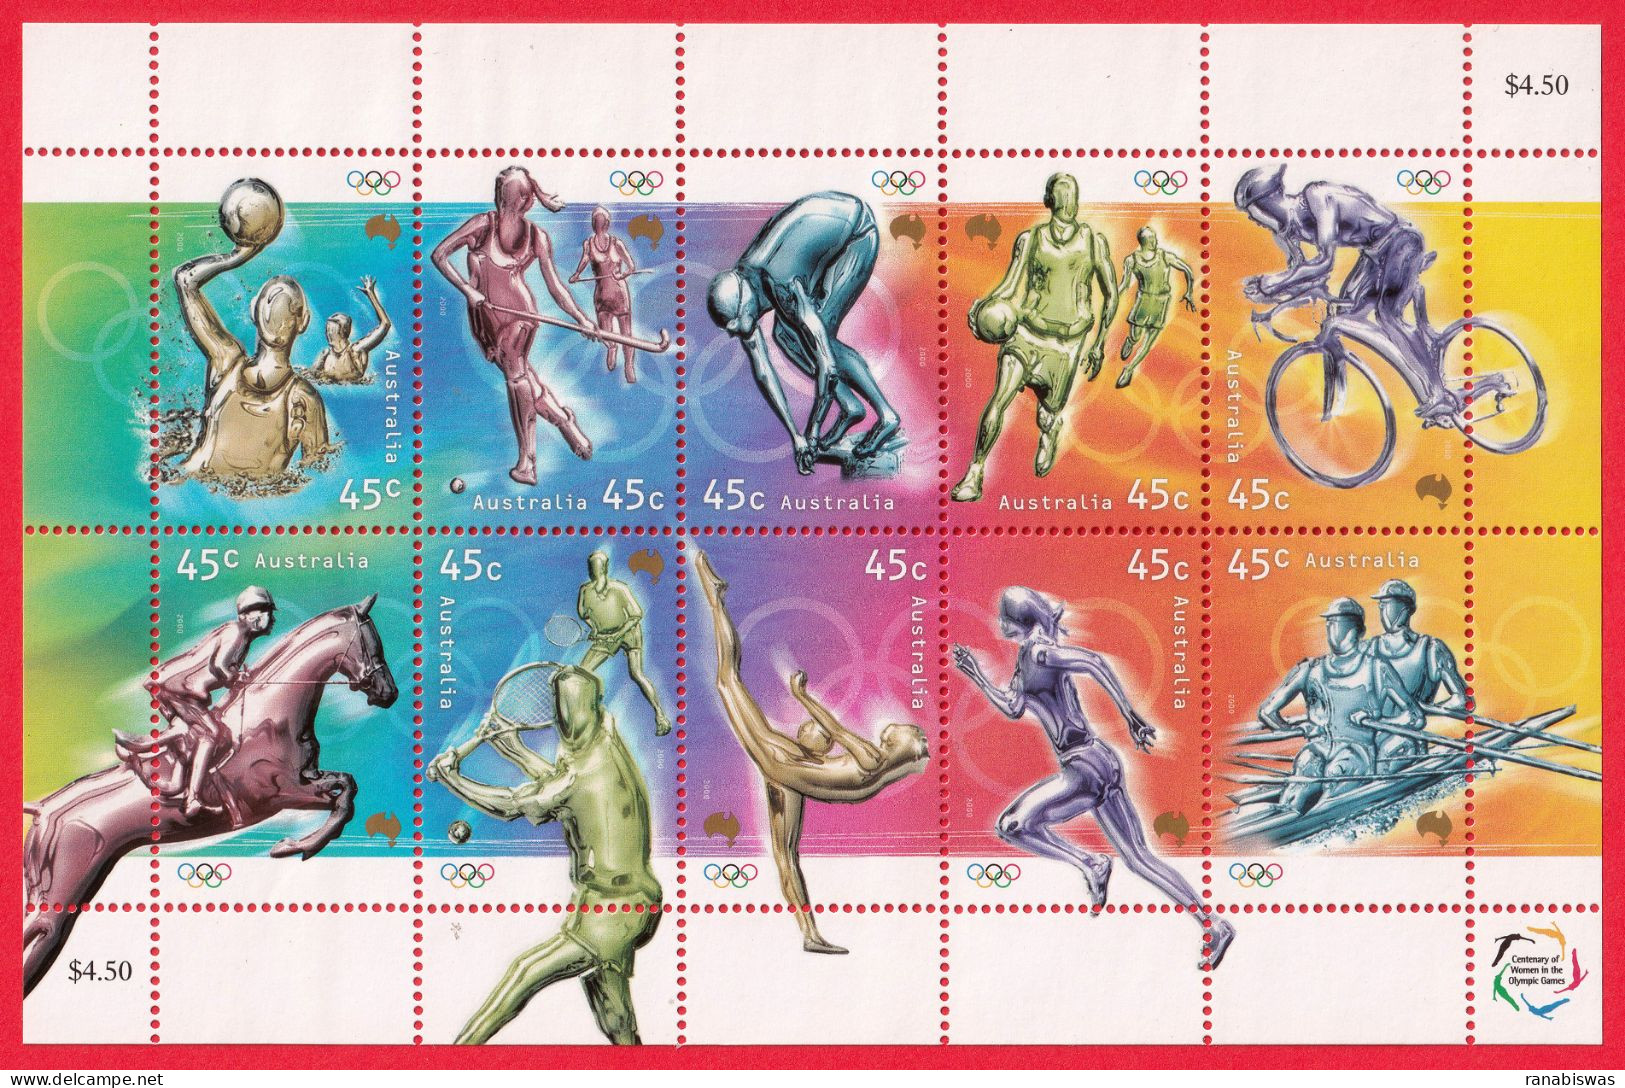 AUSTRALIA STAMPS 2000, SETENANT SHEET OF 10, OLYMPIC GAMES, SPORTS, MNH - Blocs - Feuillets